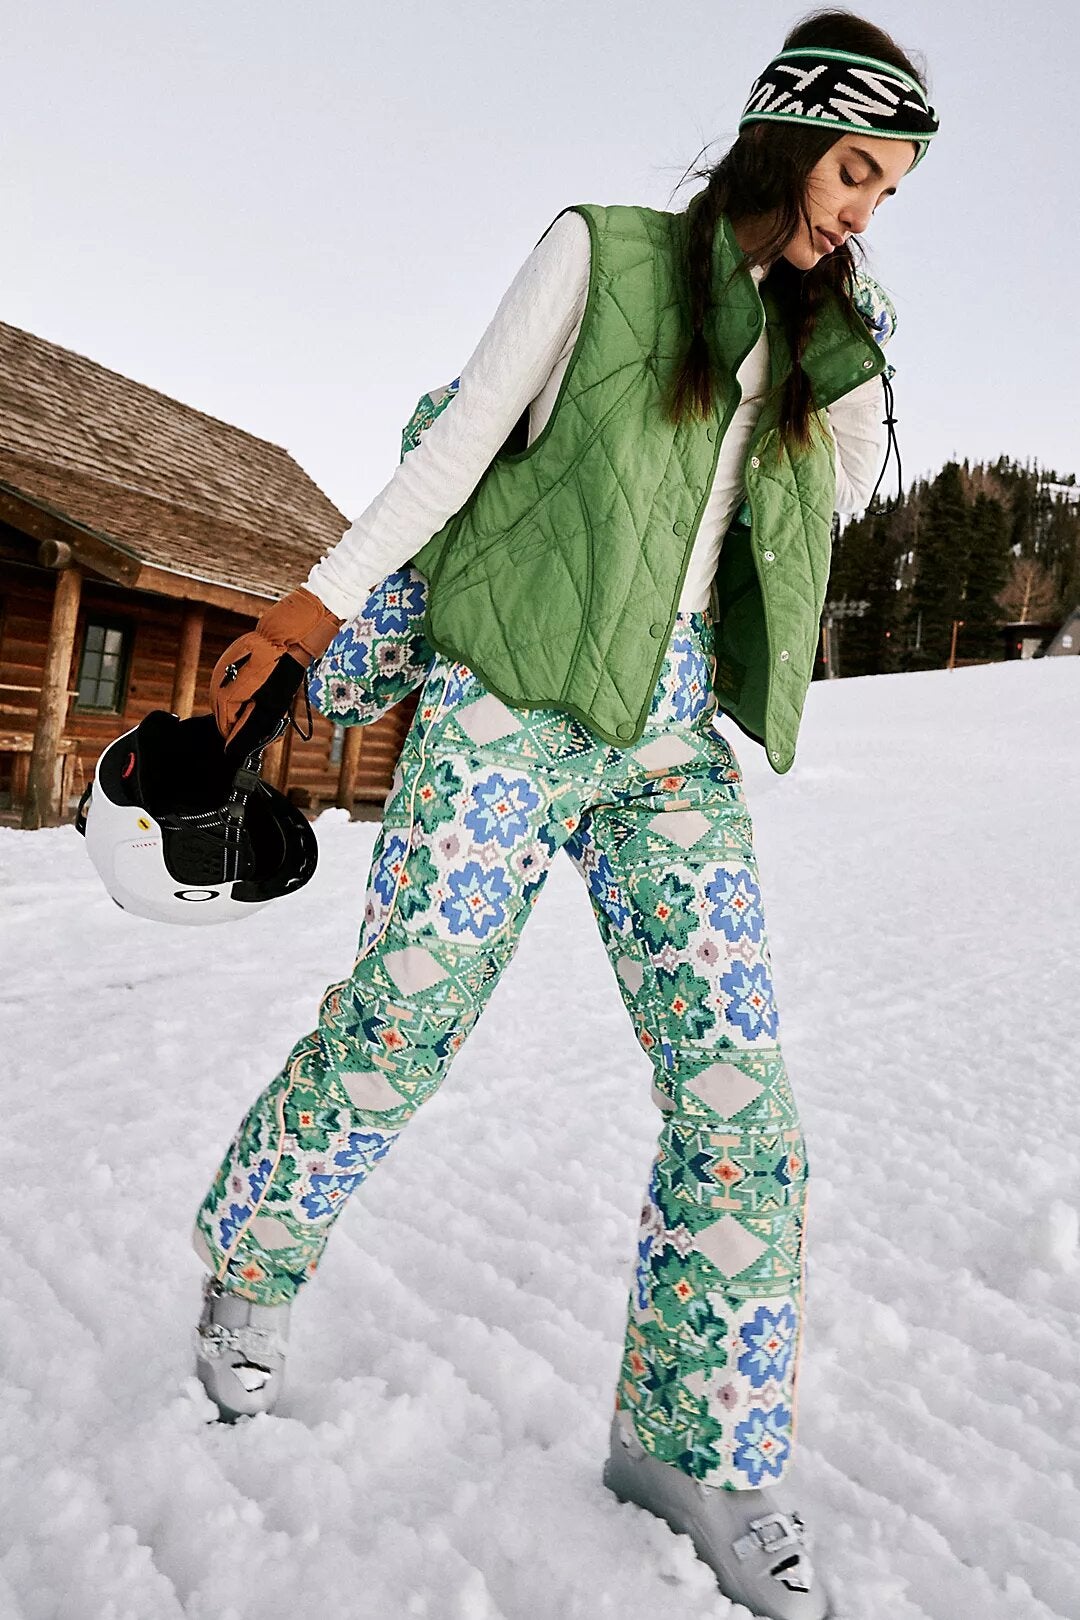 Free People FP Movement Landscape View Ski Pants Green Combo Small New 